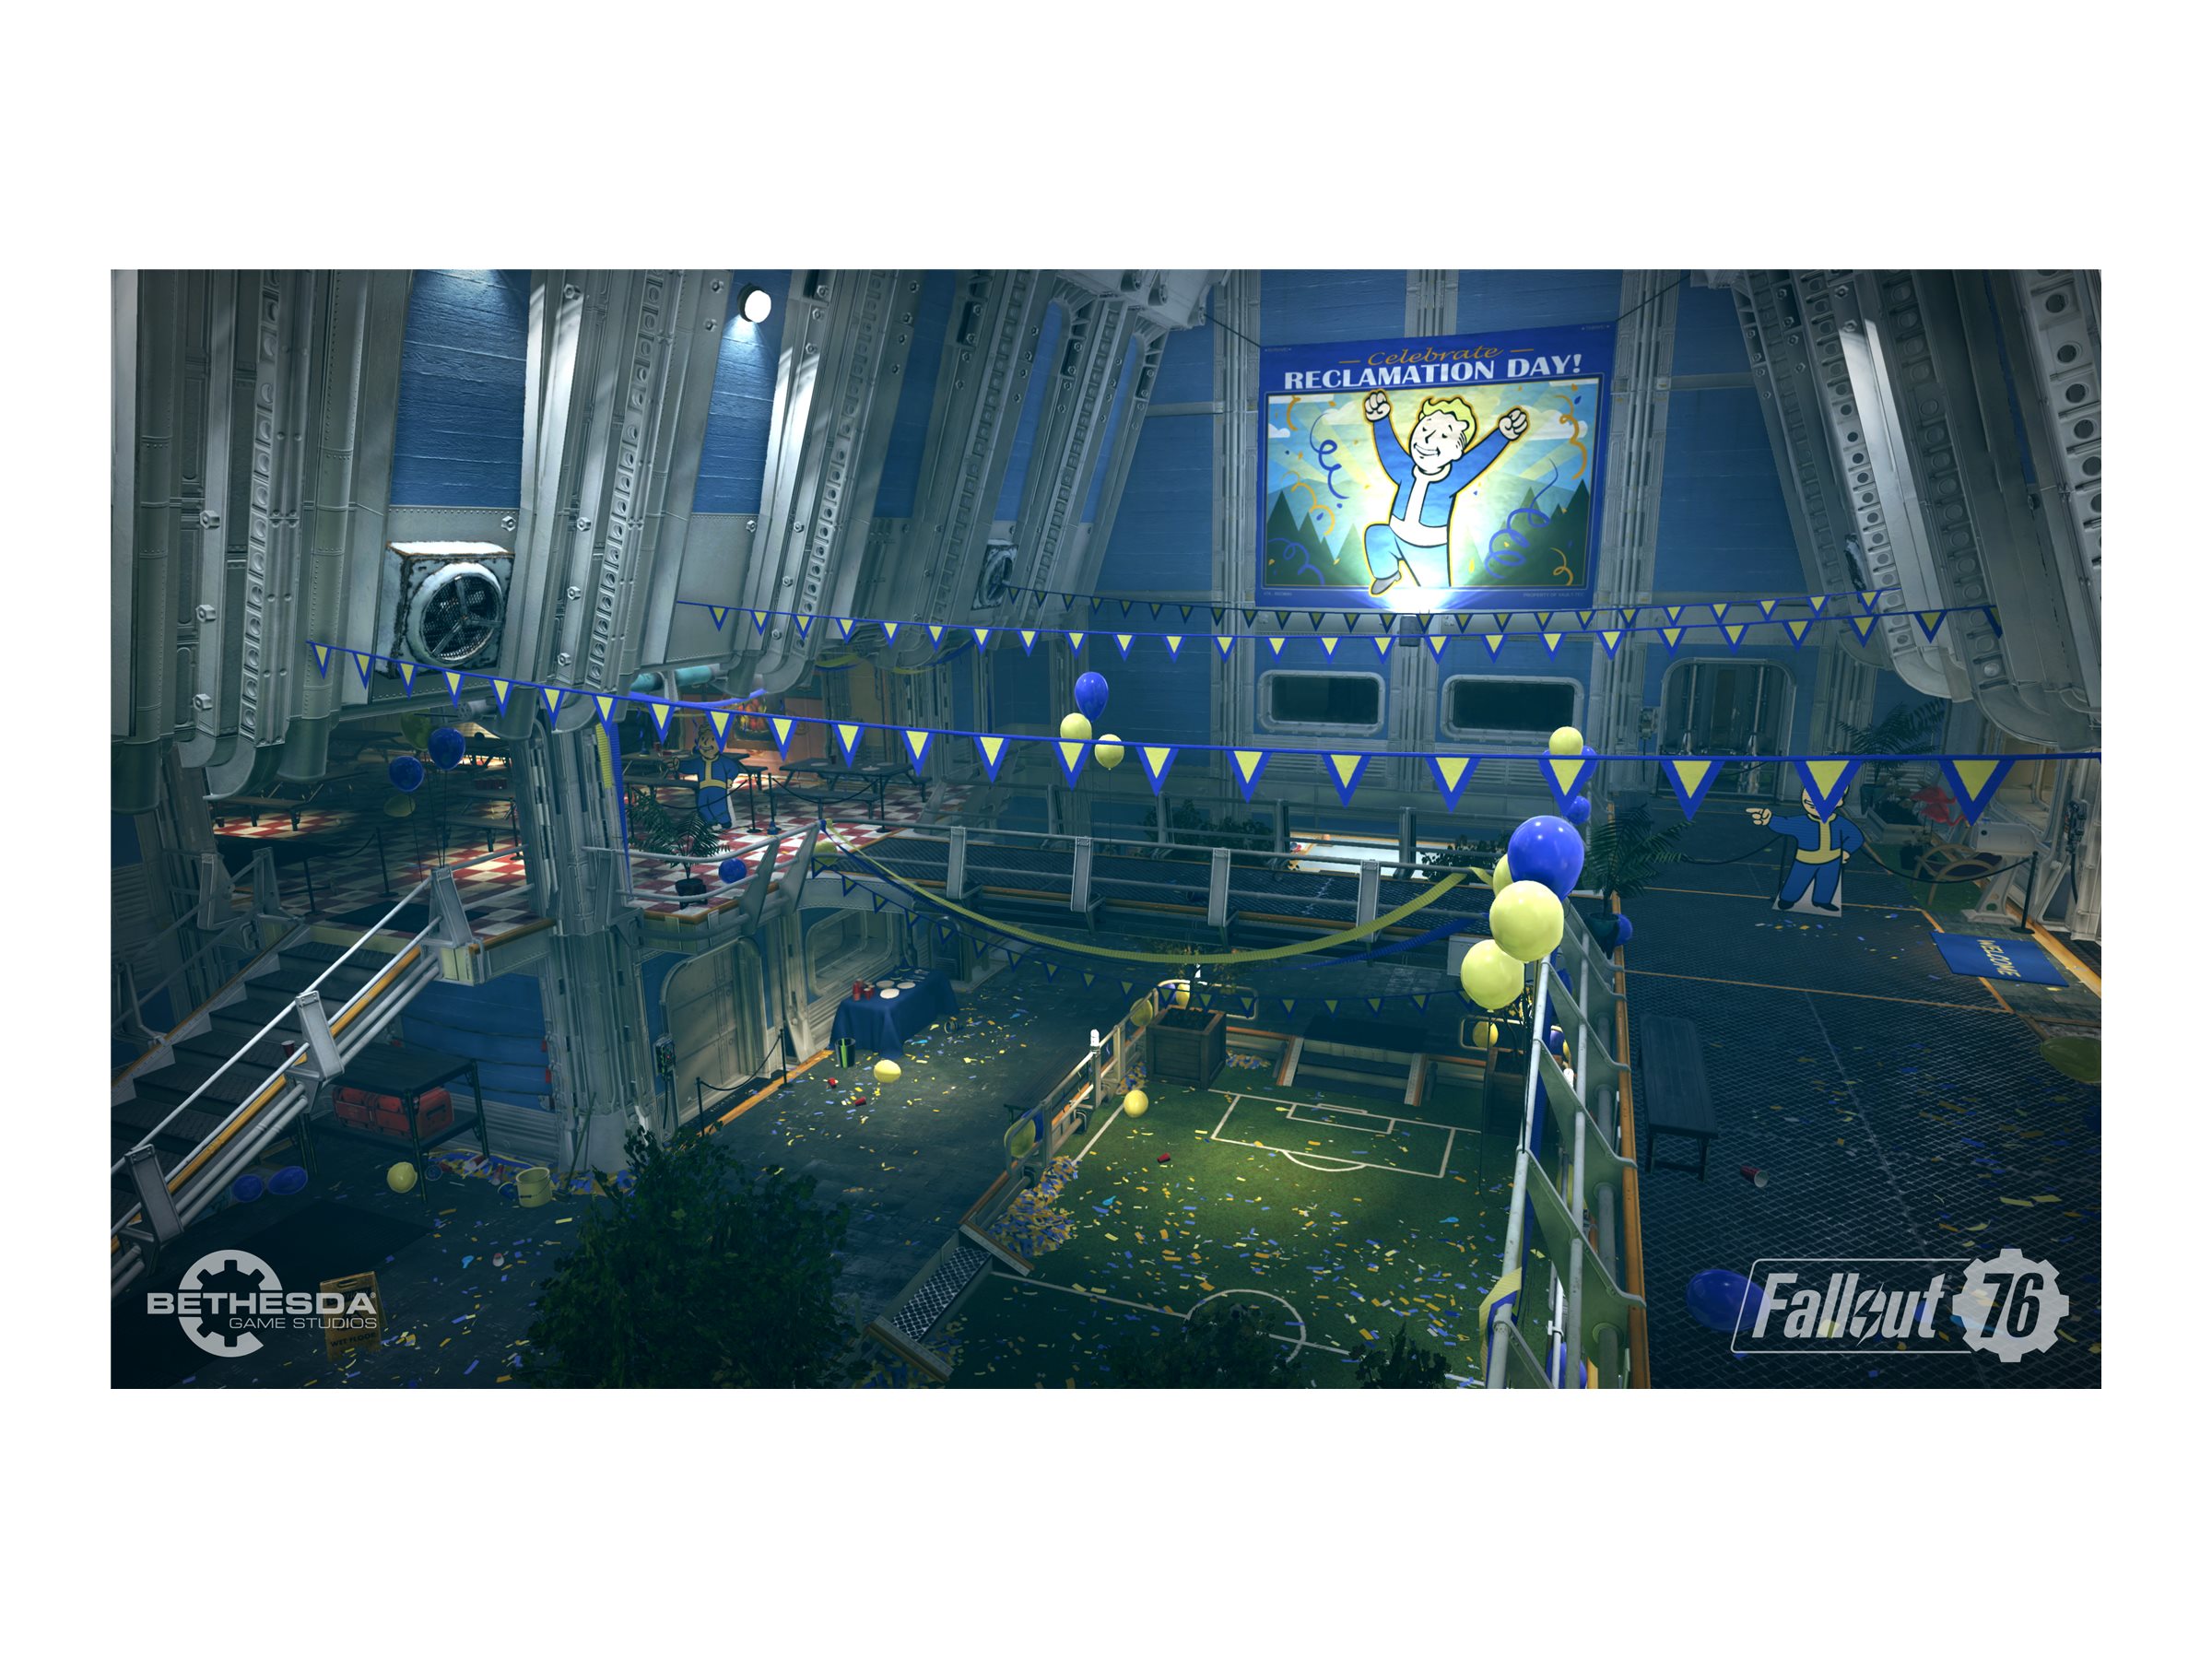 Fallout 76 Tricentennial Edition, Bethesda Softworks, PlayStation 4, 093155173118 - image 2 of 5